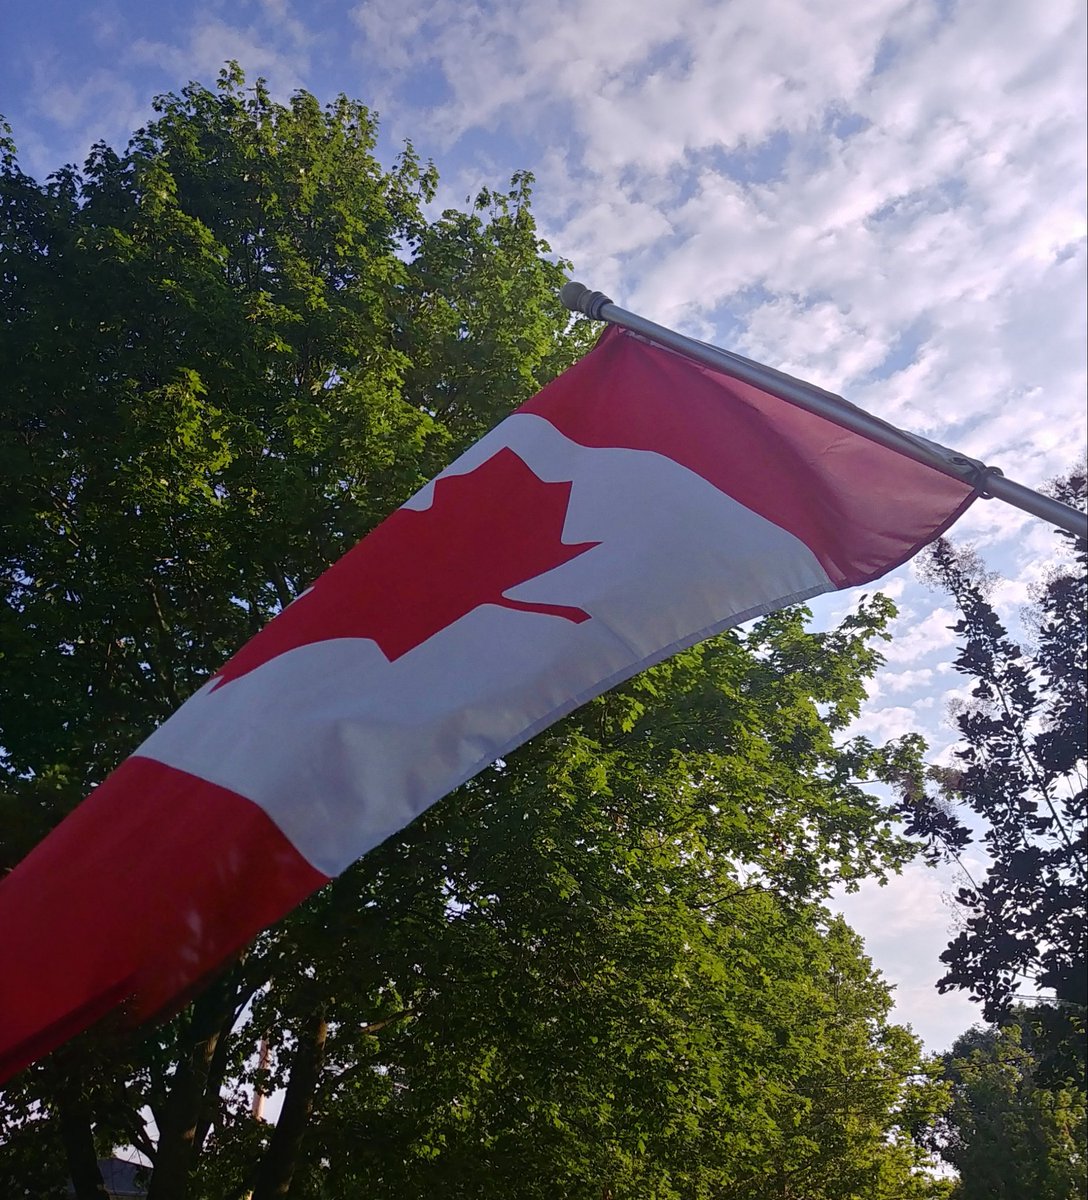 What a beautiful day for #CanadaDay, one of the best days of the year! It's the best country in the world, let's keep it strong and free! #ProudToBeCanadian
#CanadaDay2021 🇨🇦 🎉 🍻 🎆 🇨🇦